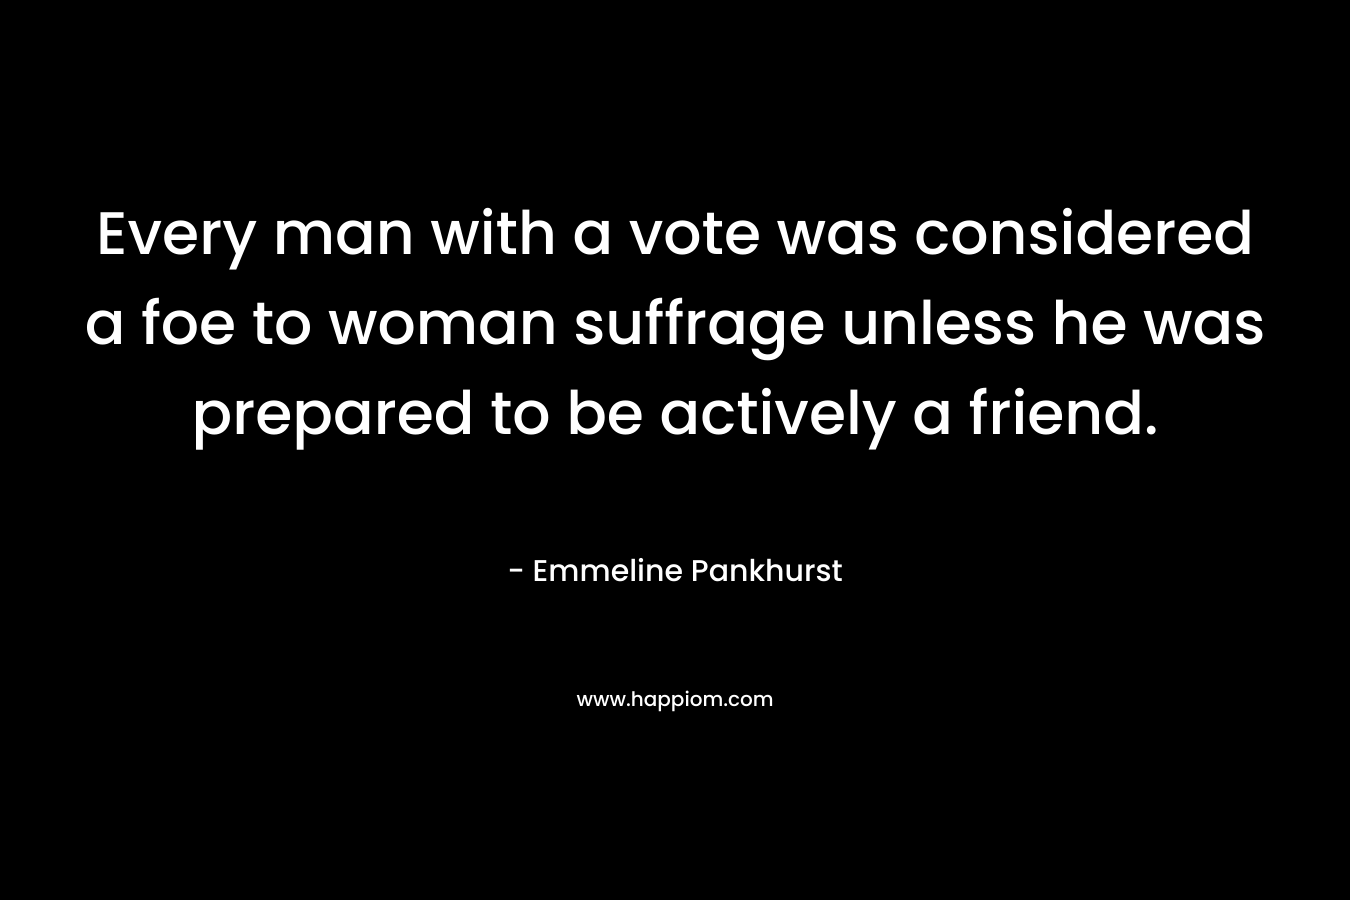 Every man with a vote was considered a foe to woman suffrage unless he was prepared to be actively a friend. – Emmeline Pankhurst